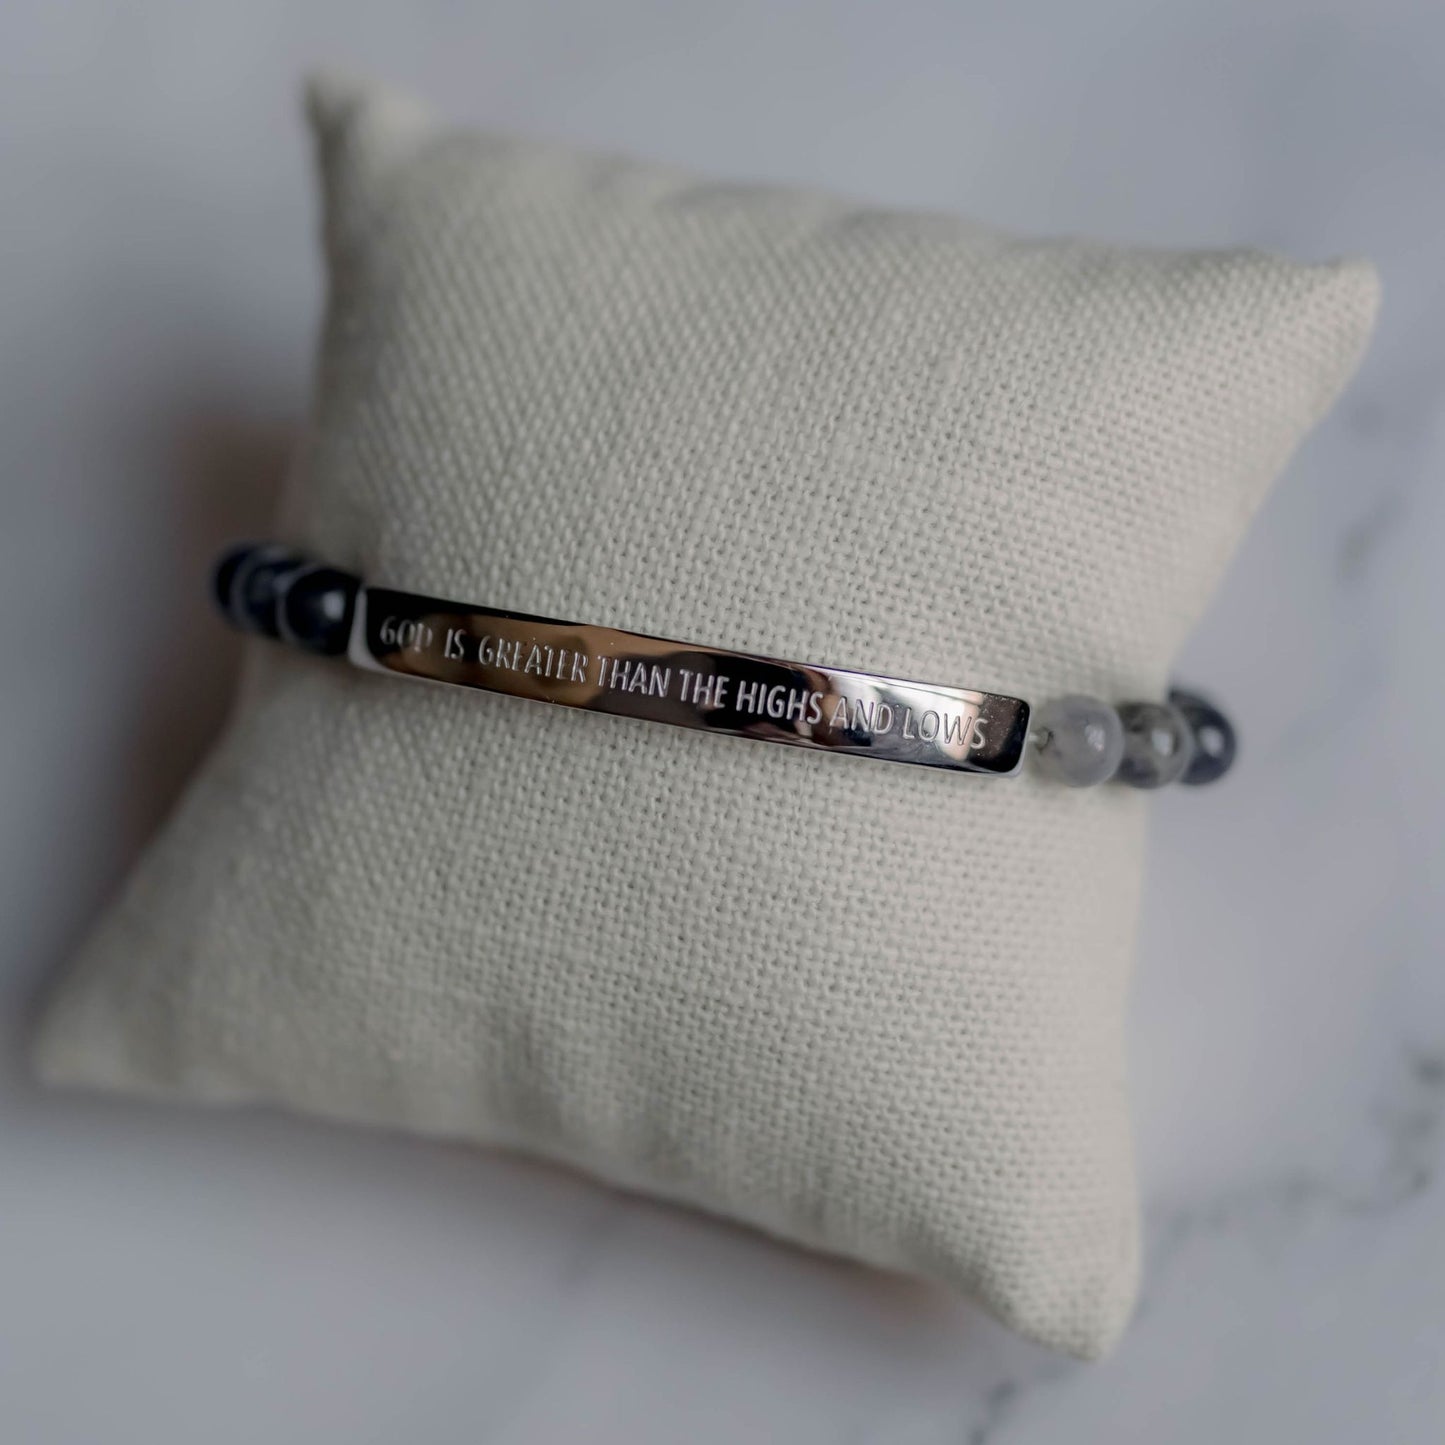 Close-up of 'God Is Greater Than The Highs And Lows' Bracelet